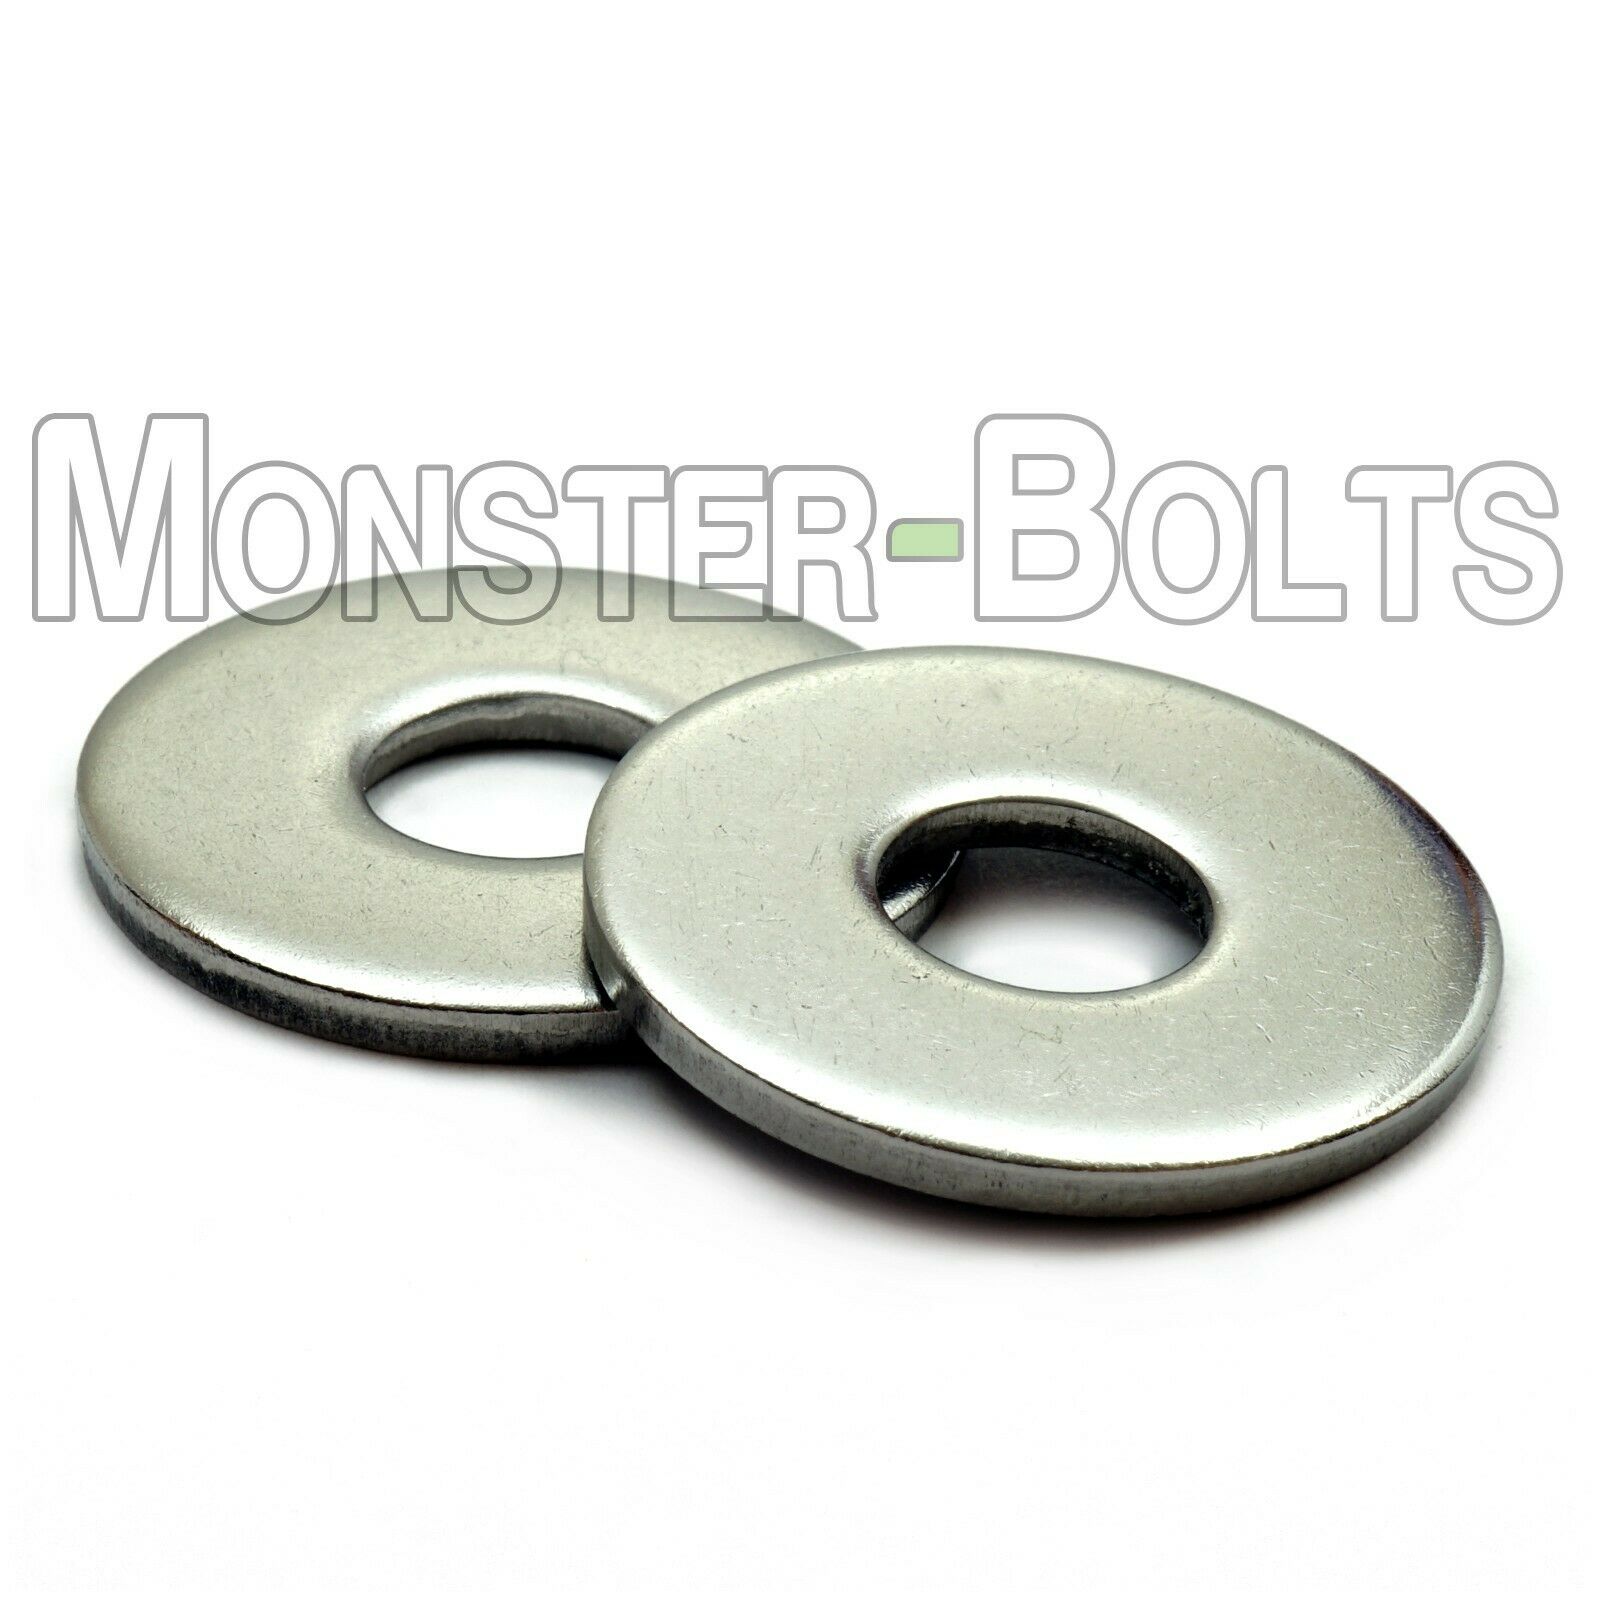 Stainless Steel Fender (penny) Washers, A2 Din 9021 - M3 M4 M5 M6 M8 M10 M12